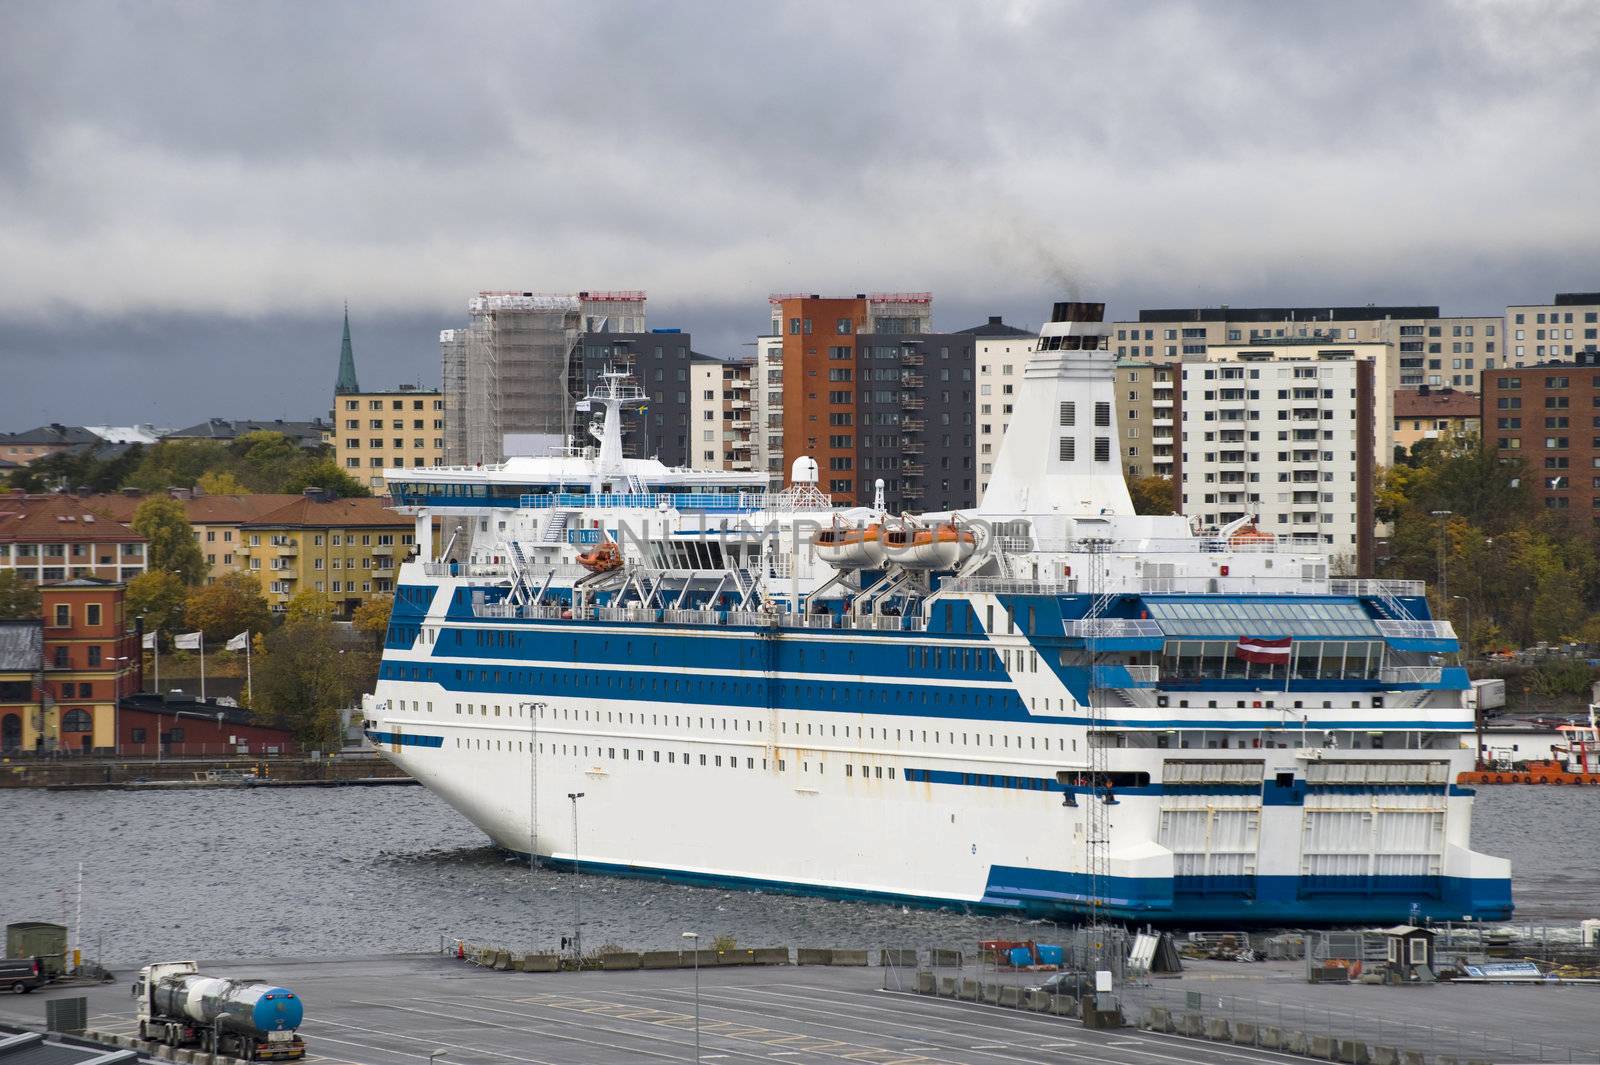 Cruise ship in the Stockholm port